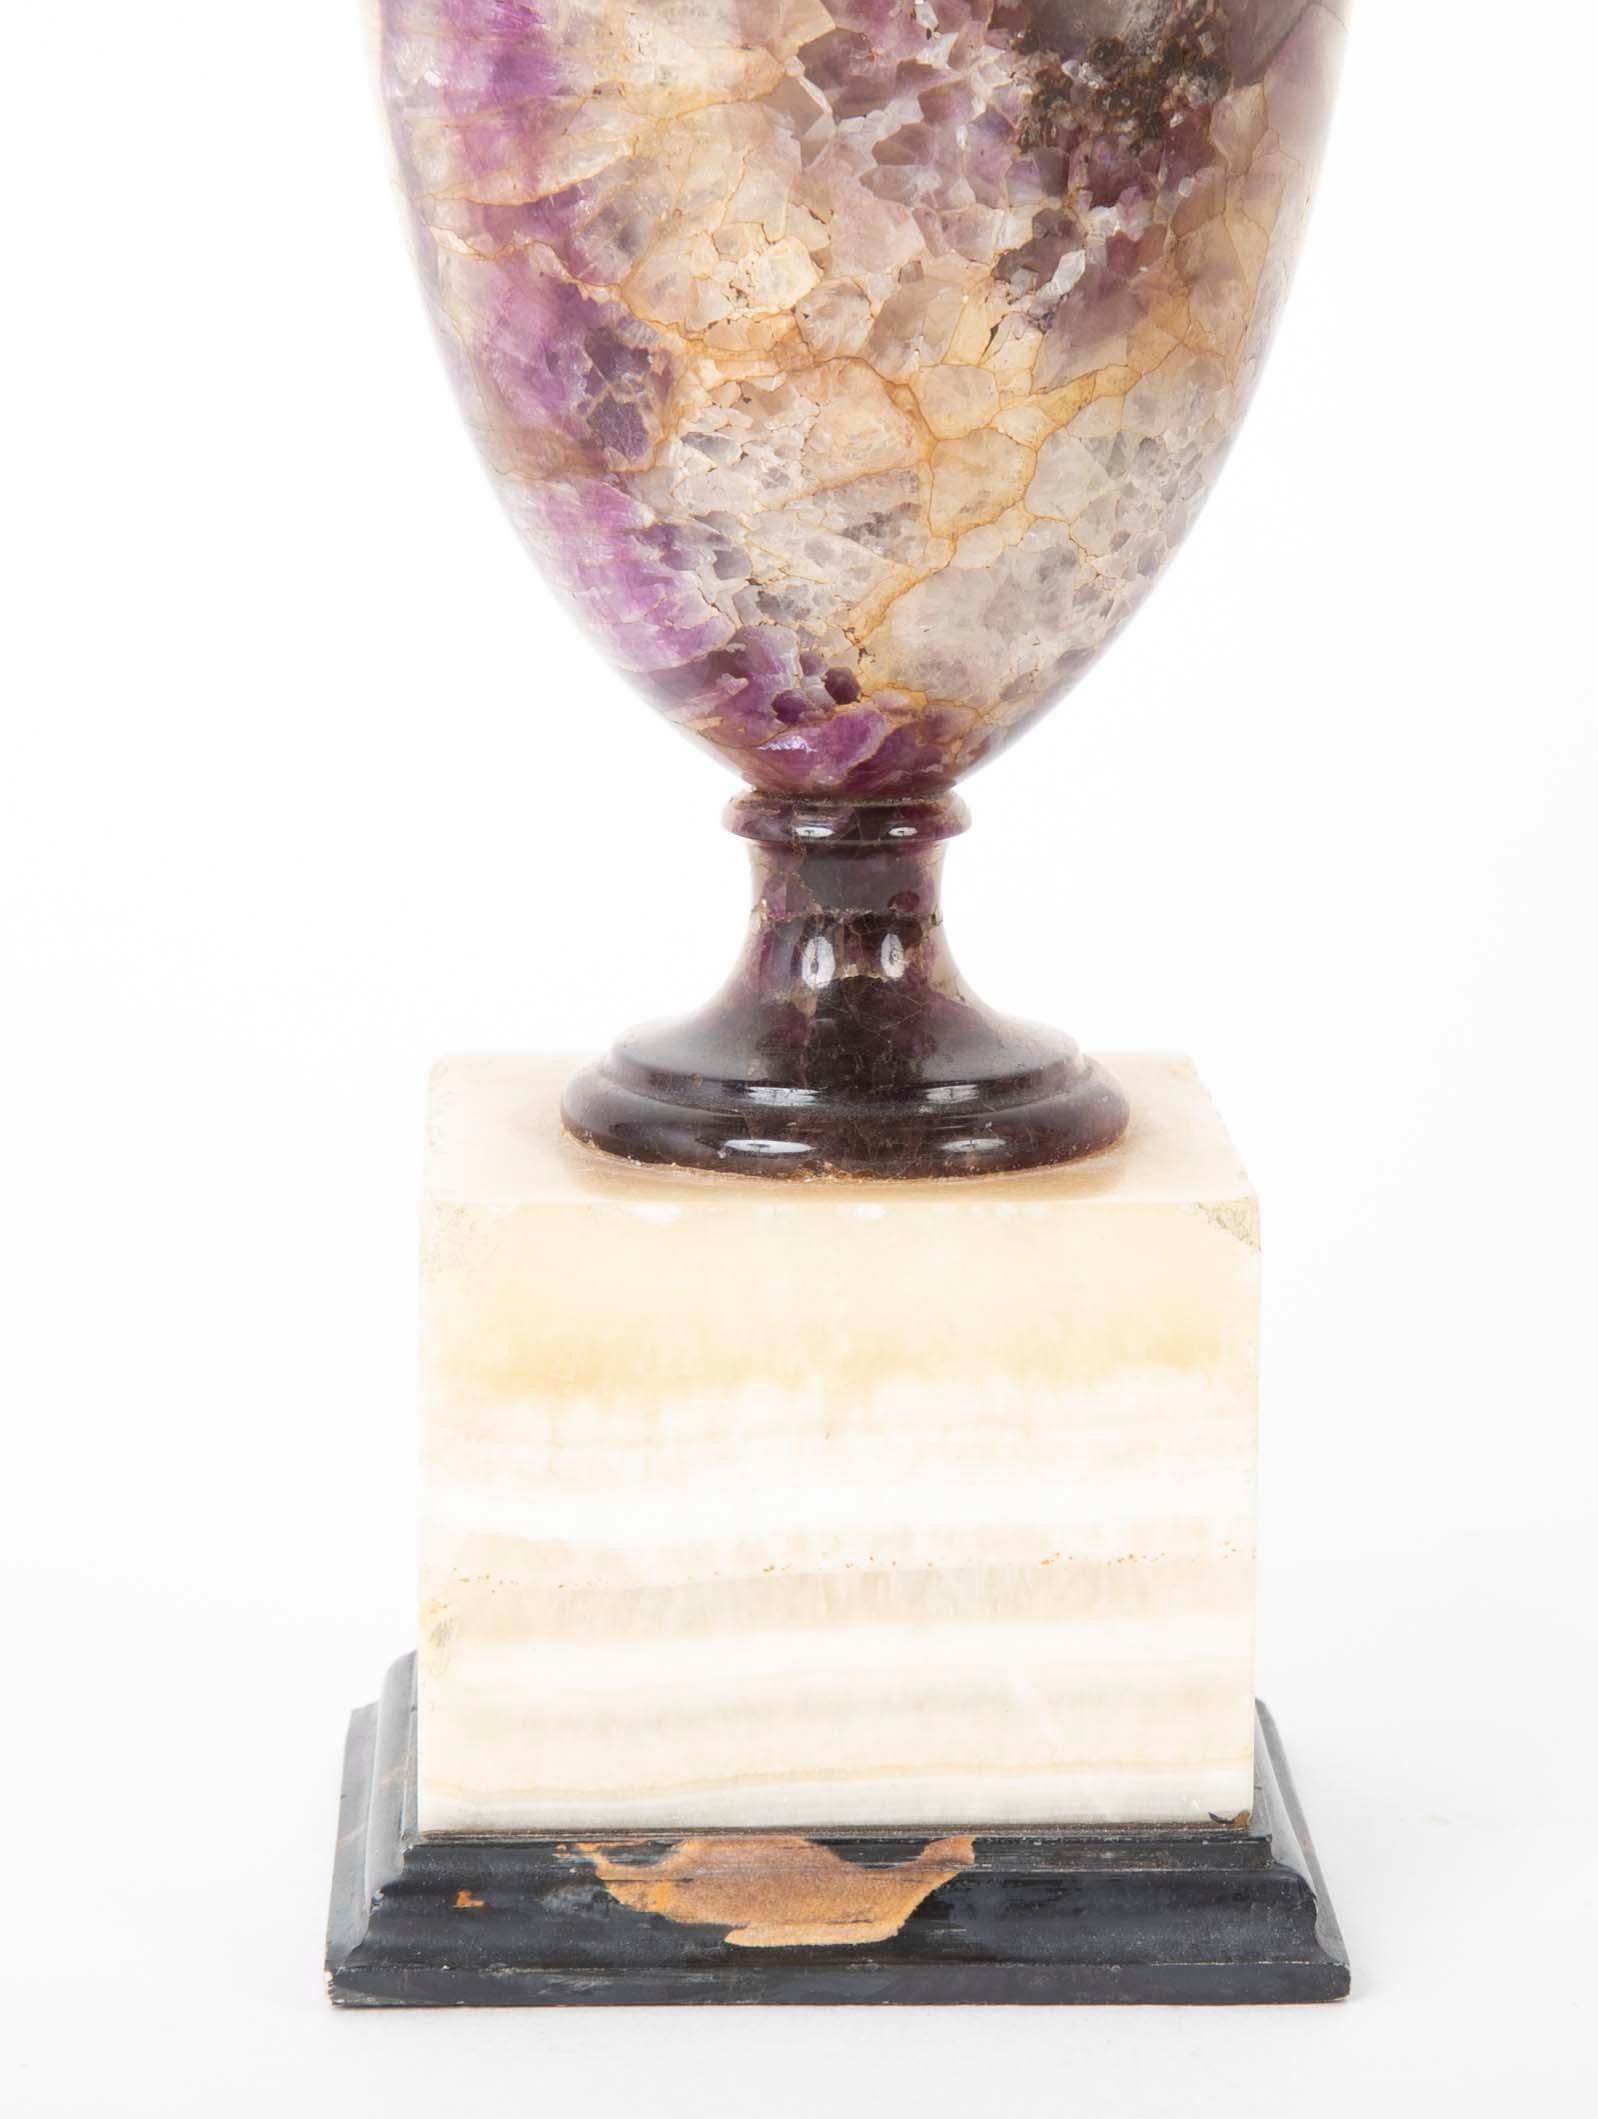 An English blue John covered urn form Orniment raised on white Florite plinth with a molded Portoro base, circa late 18th-early 19th century.